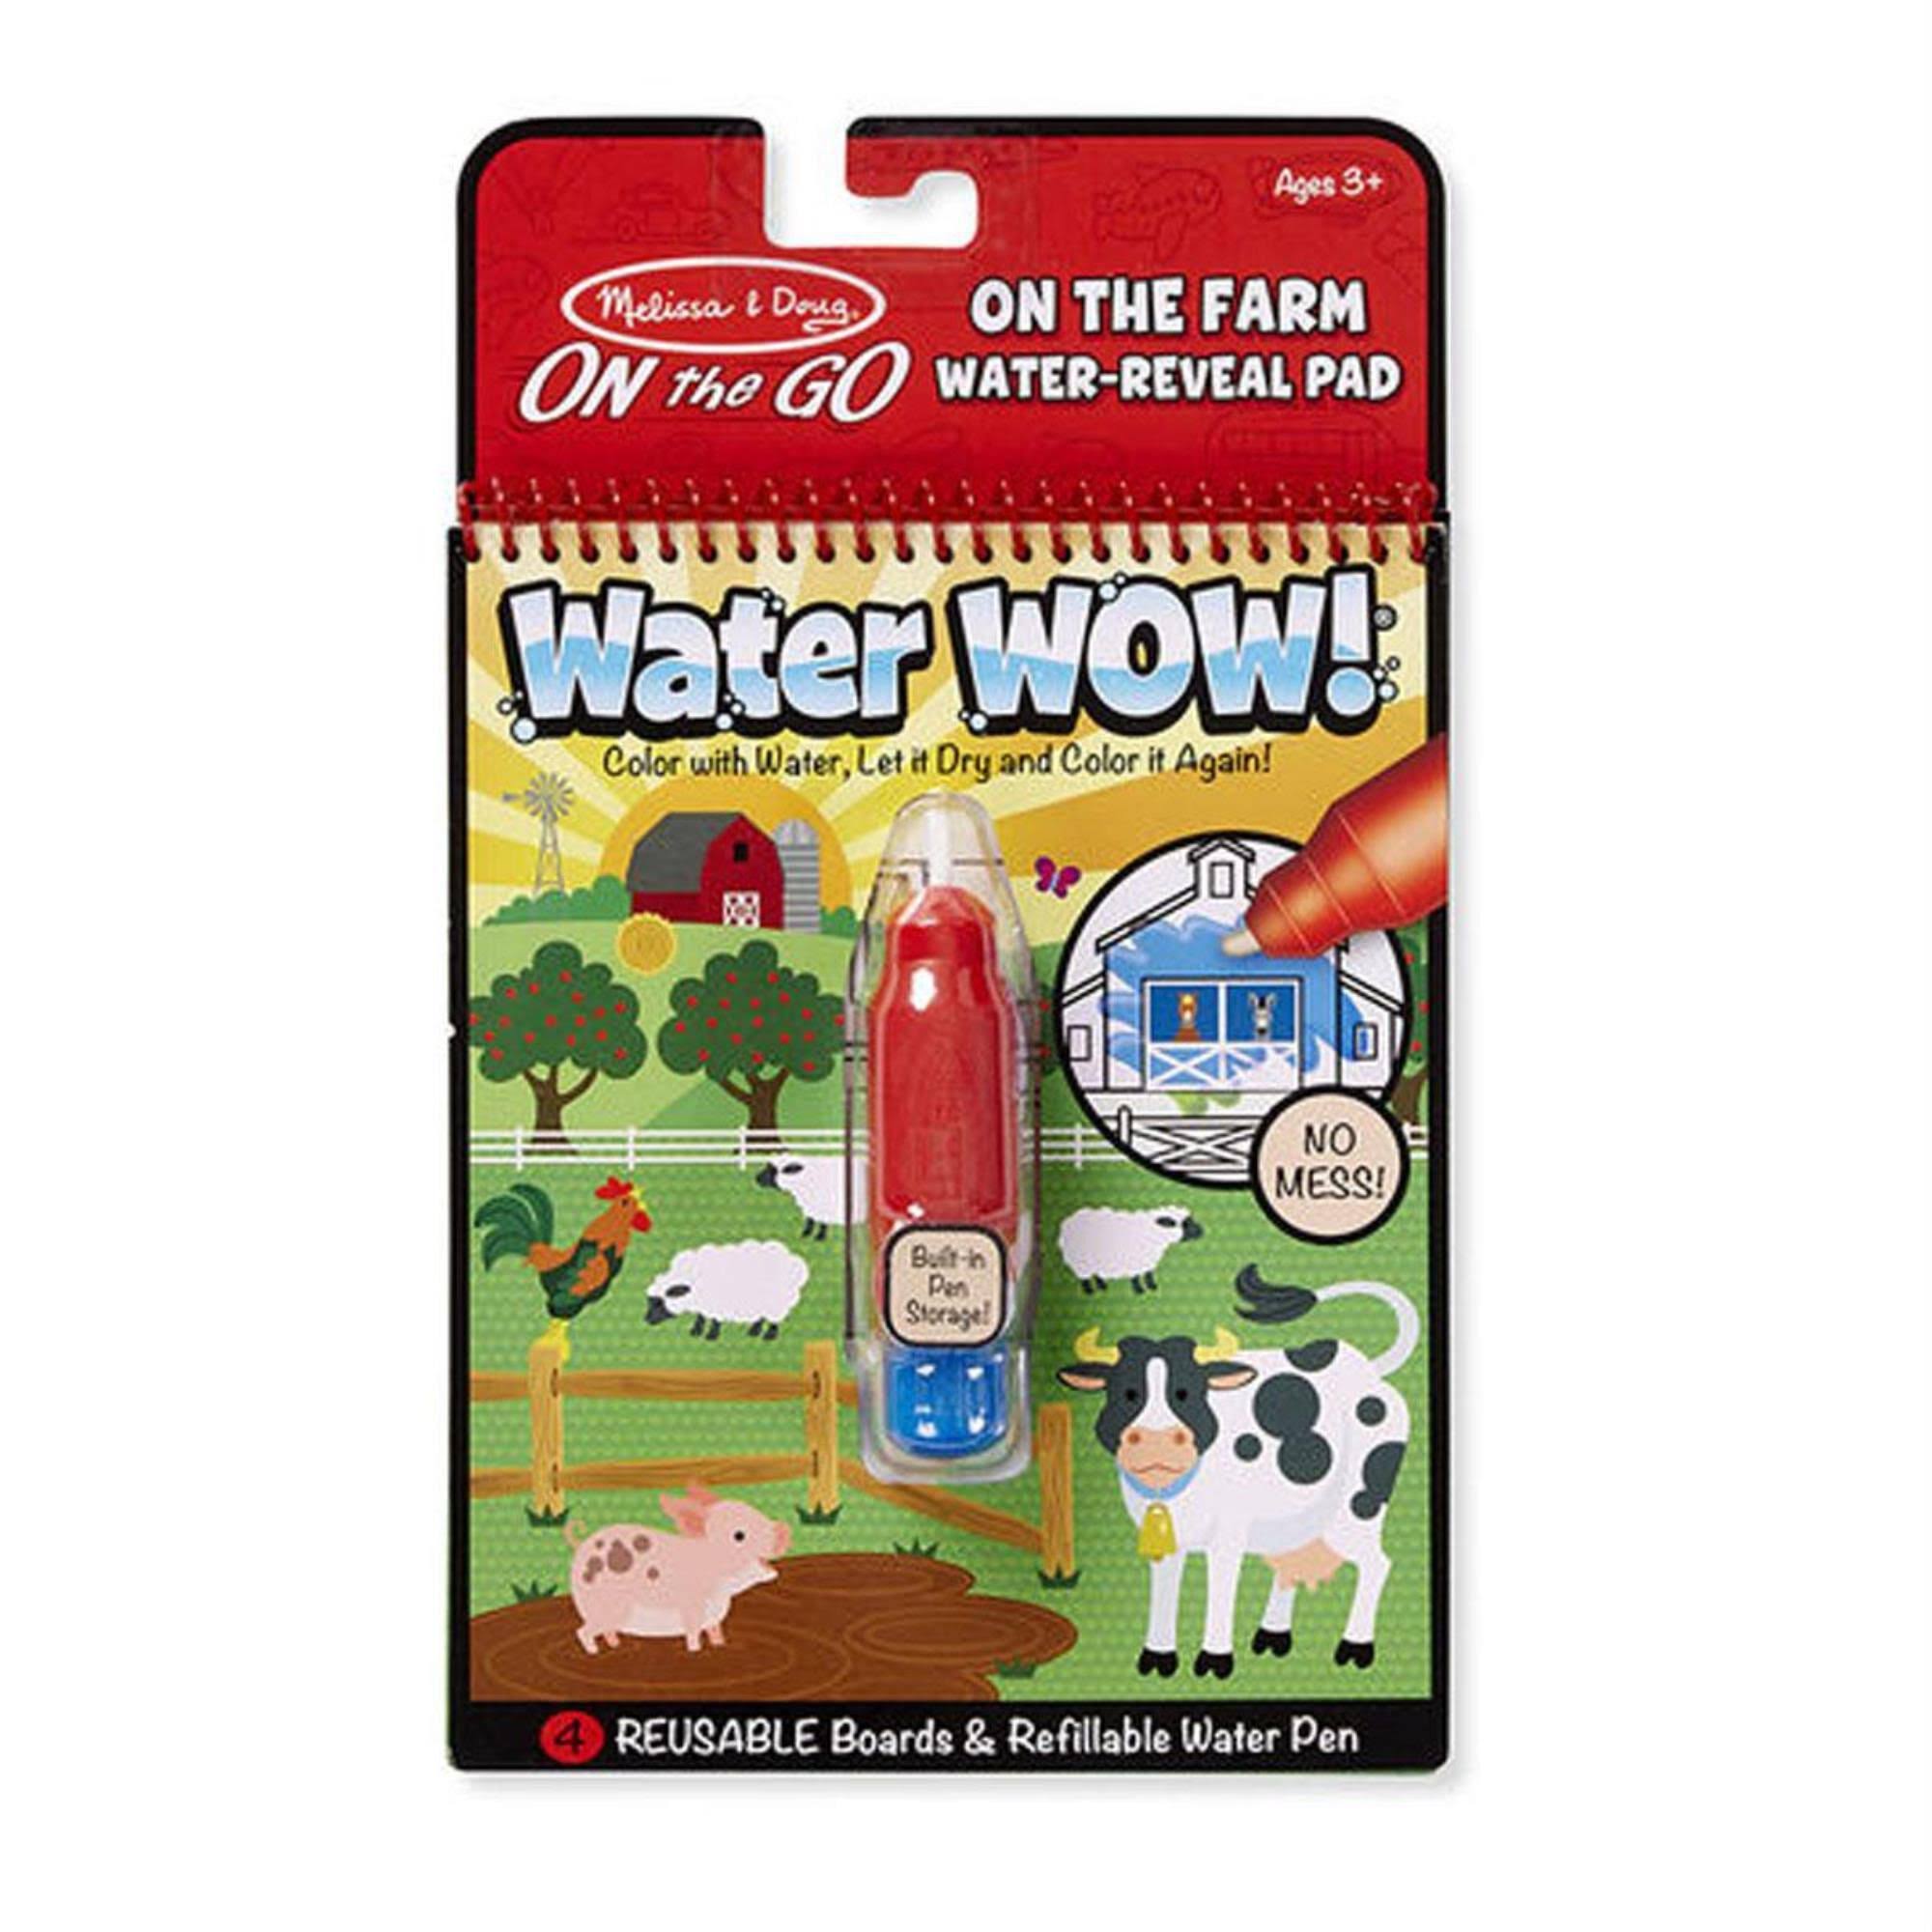 Melissa and Doug On the Go Water Wow On the Farm Water Reveal Pad